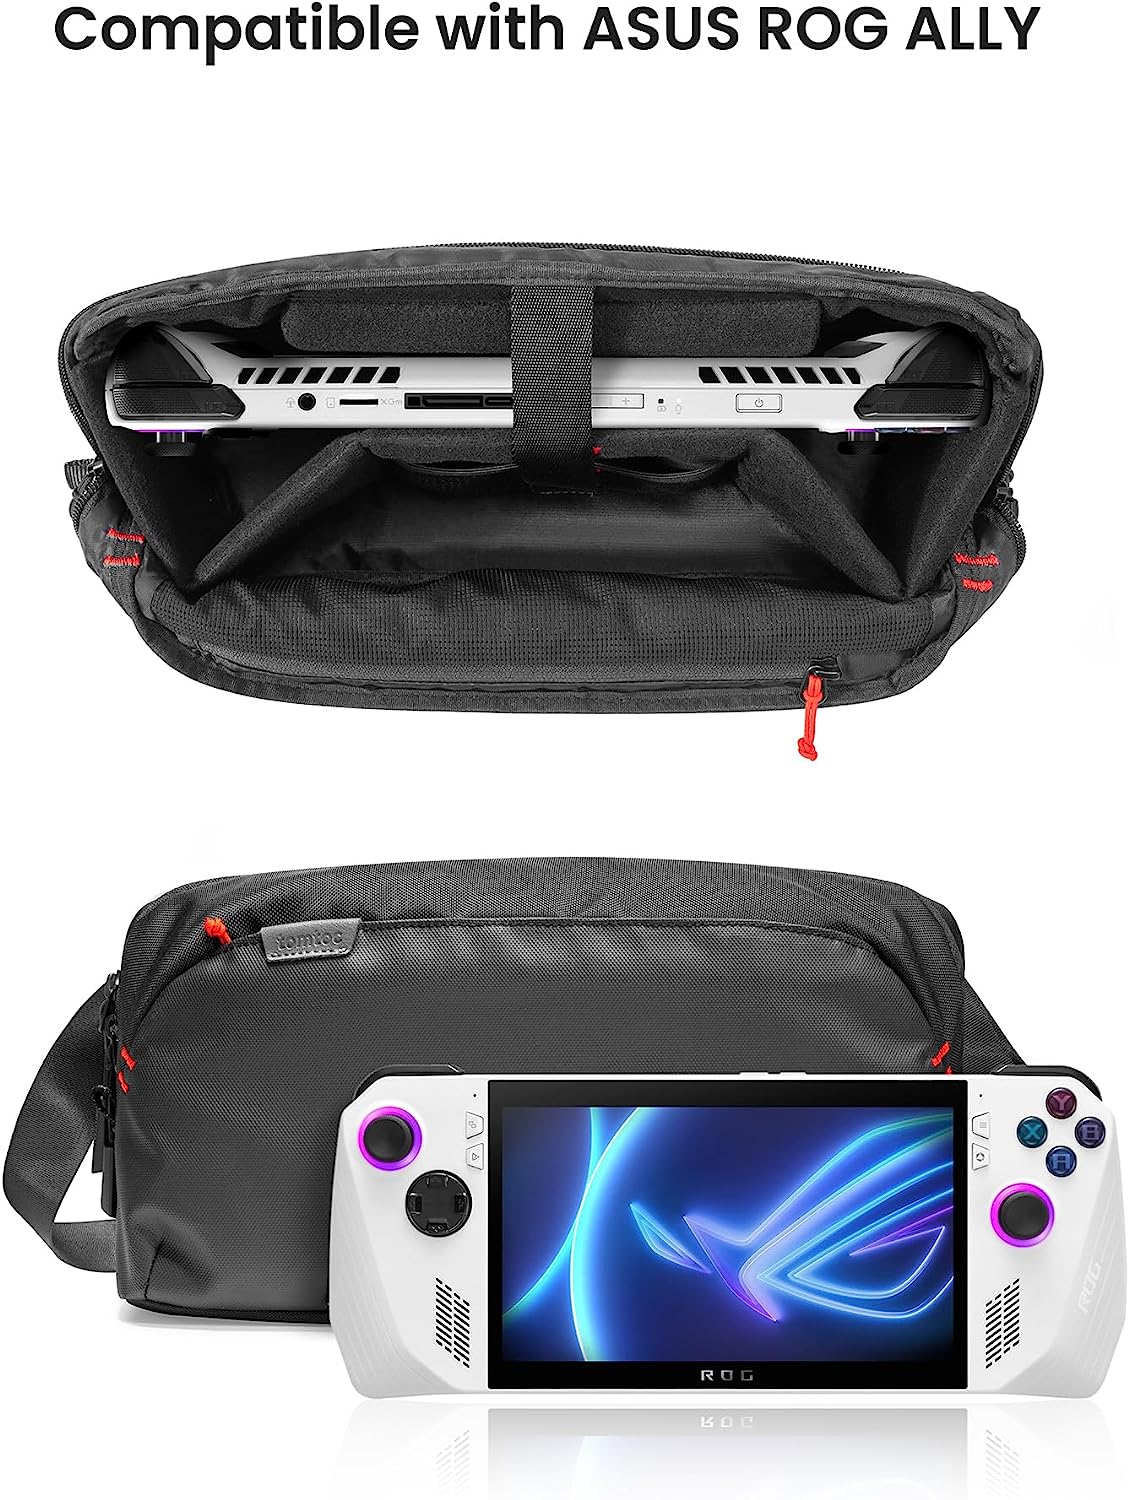 This amazing ASUS ROG Ally carrying case is finally available for purchase